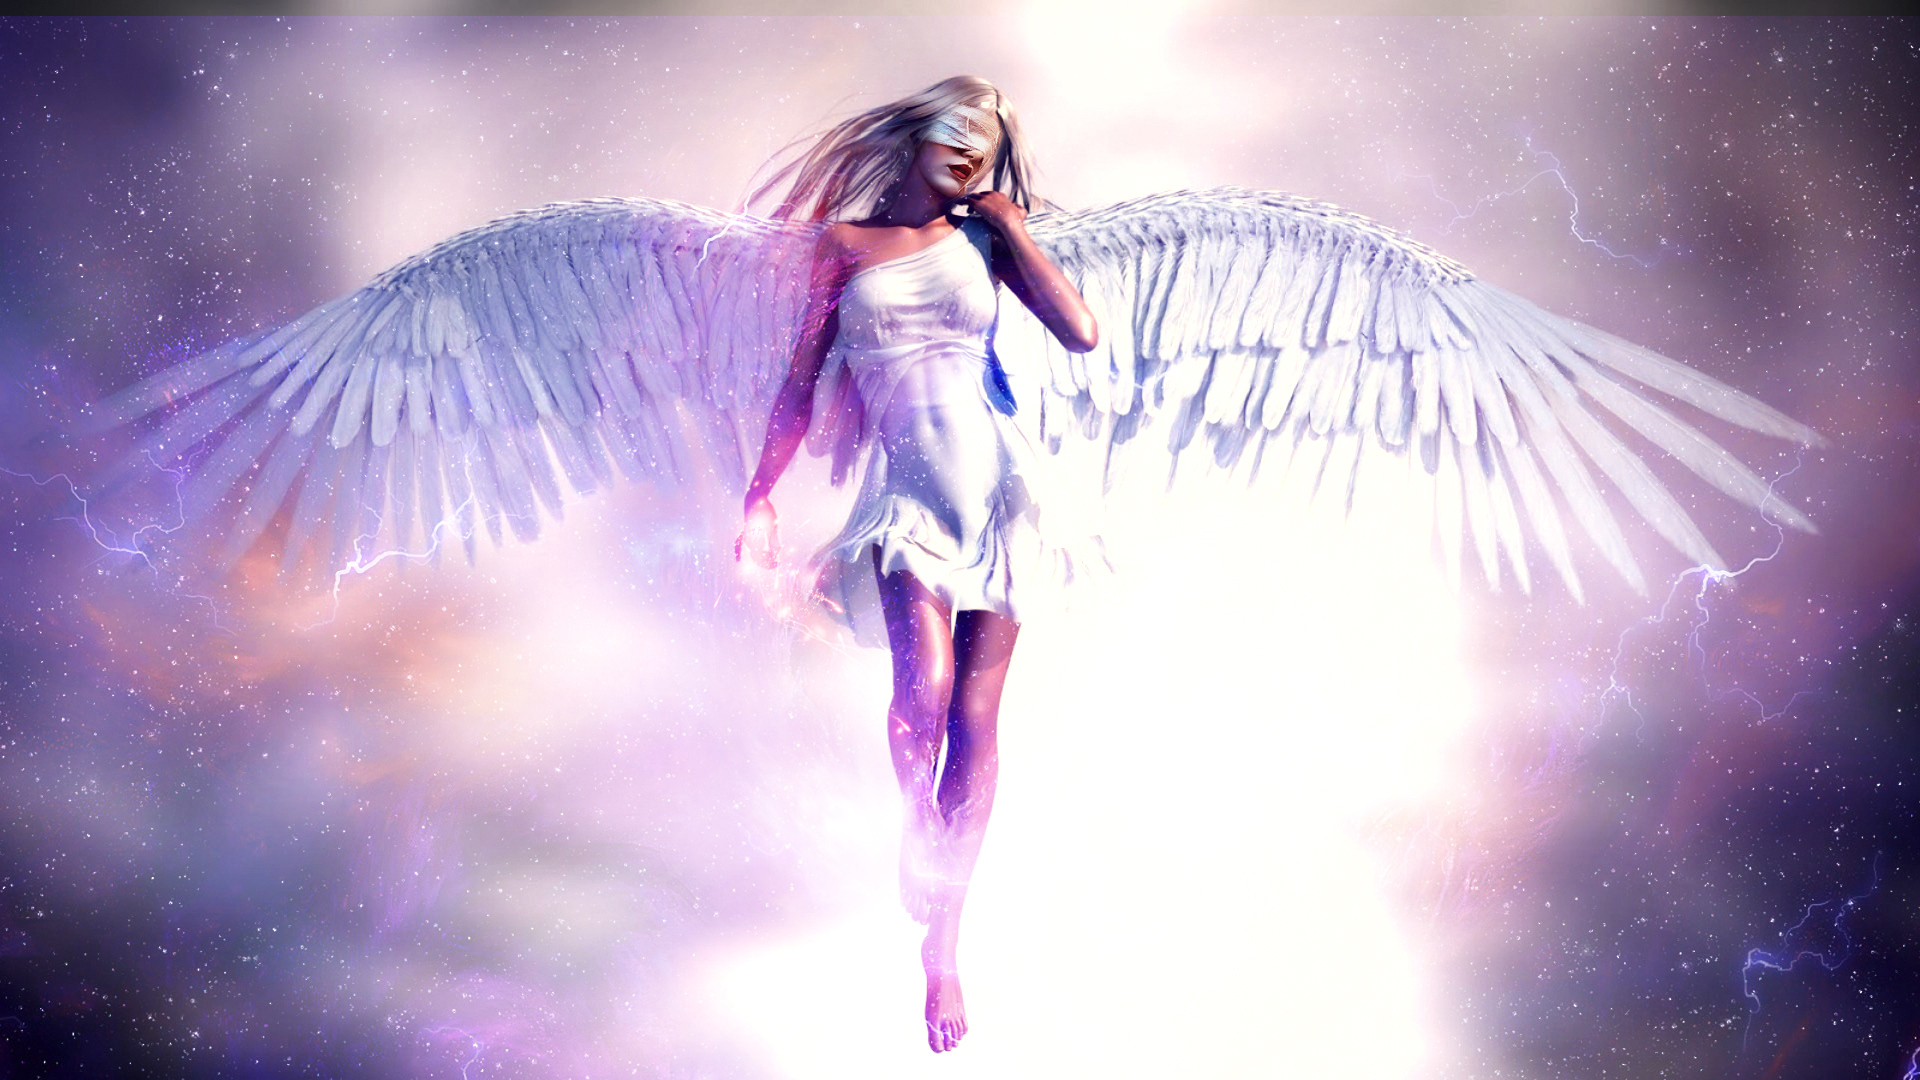 General 1920x1080 Angel I wings clouds sky lights glowing white colorful women